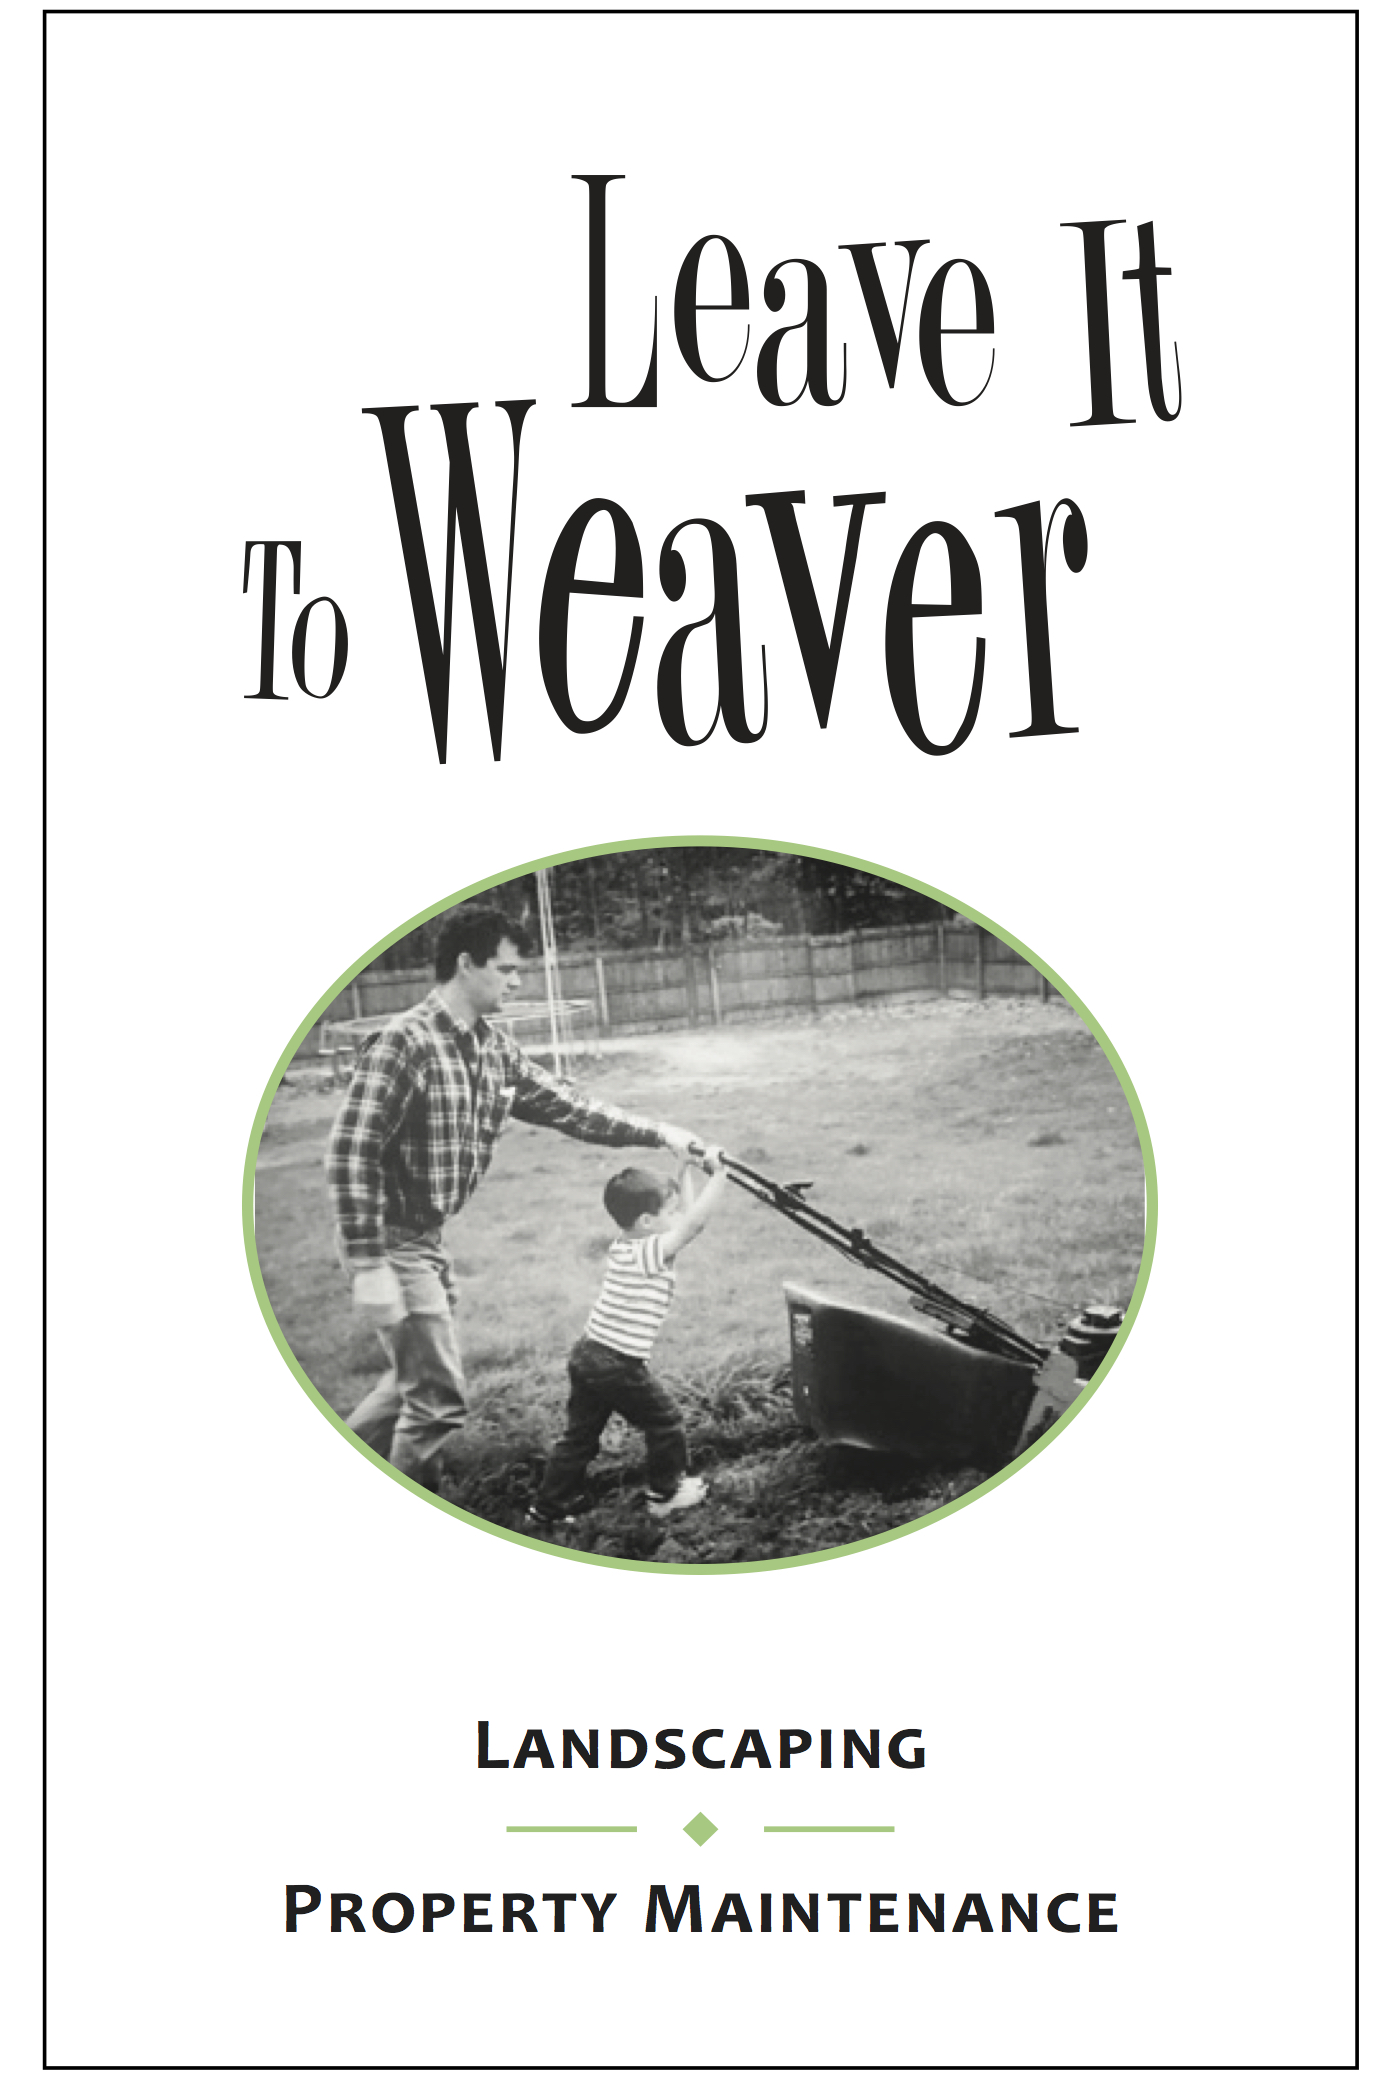 Leave it to Weaver Landscaping Logo